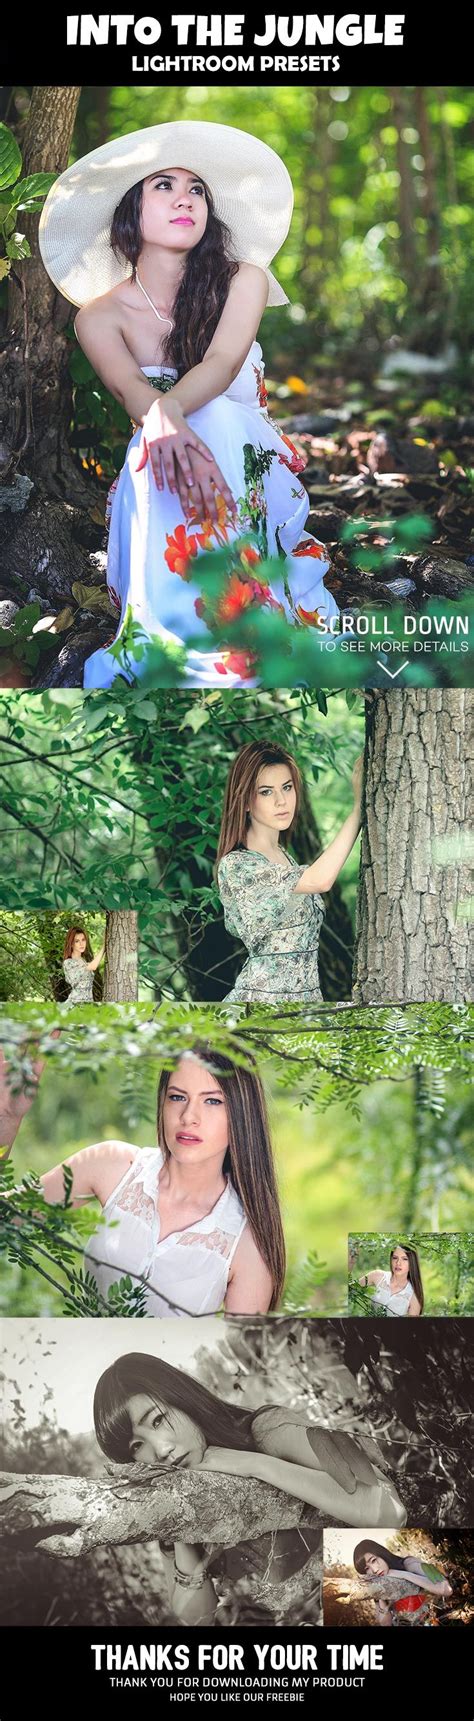 Download free lightroom green jungle presets presets today and transform your images with amazing new looks. Free Into The Jungle Lightroom Presets Ver.1 | Lightroom ...